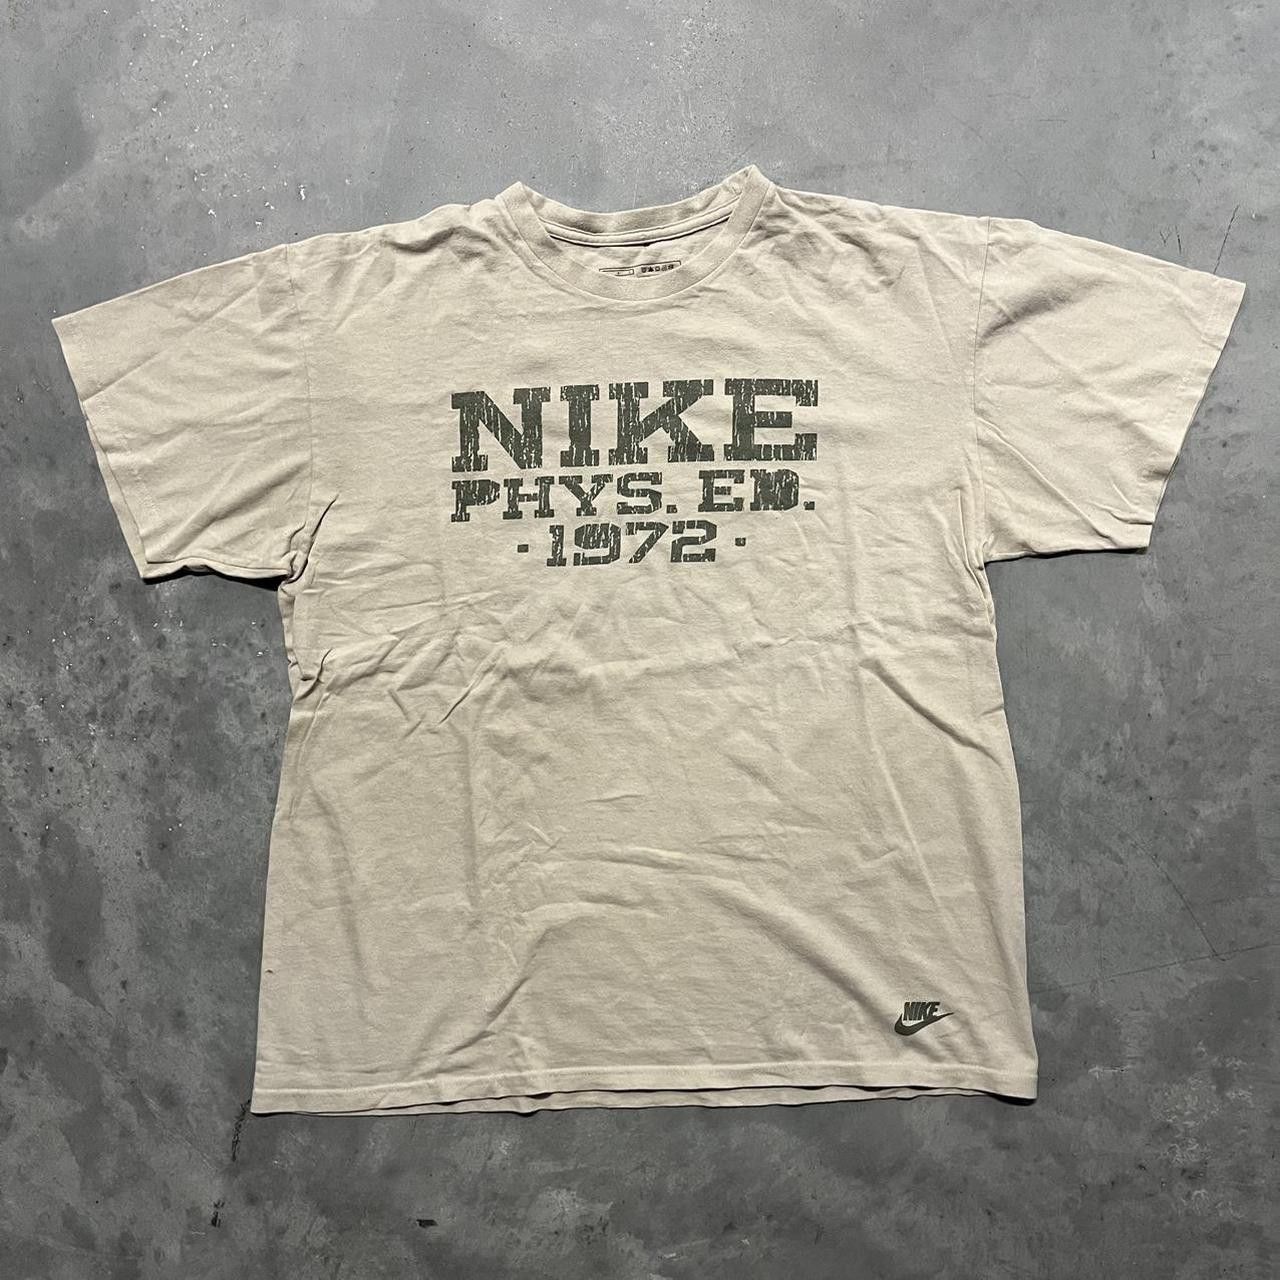 Pre-owned Nike X Vintage Crazy Vintage Y2k/2000s Cream Nike Physcial Ed. Sports Summer Essential Graphic Tee! (size Large)